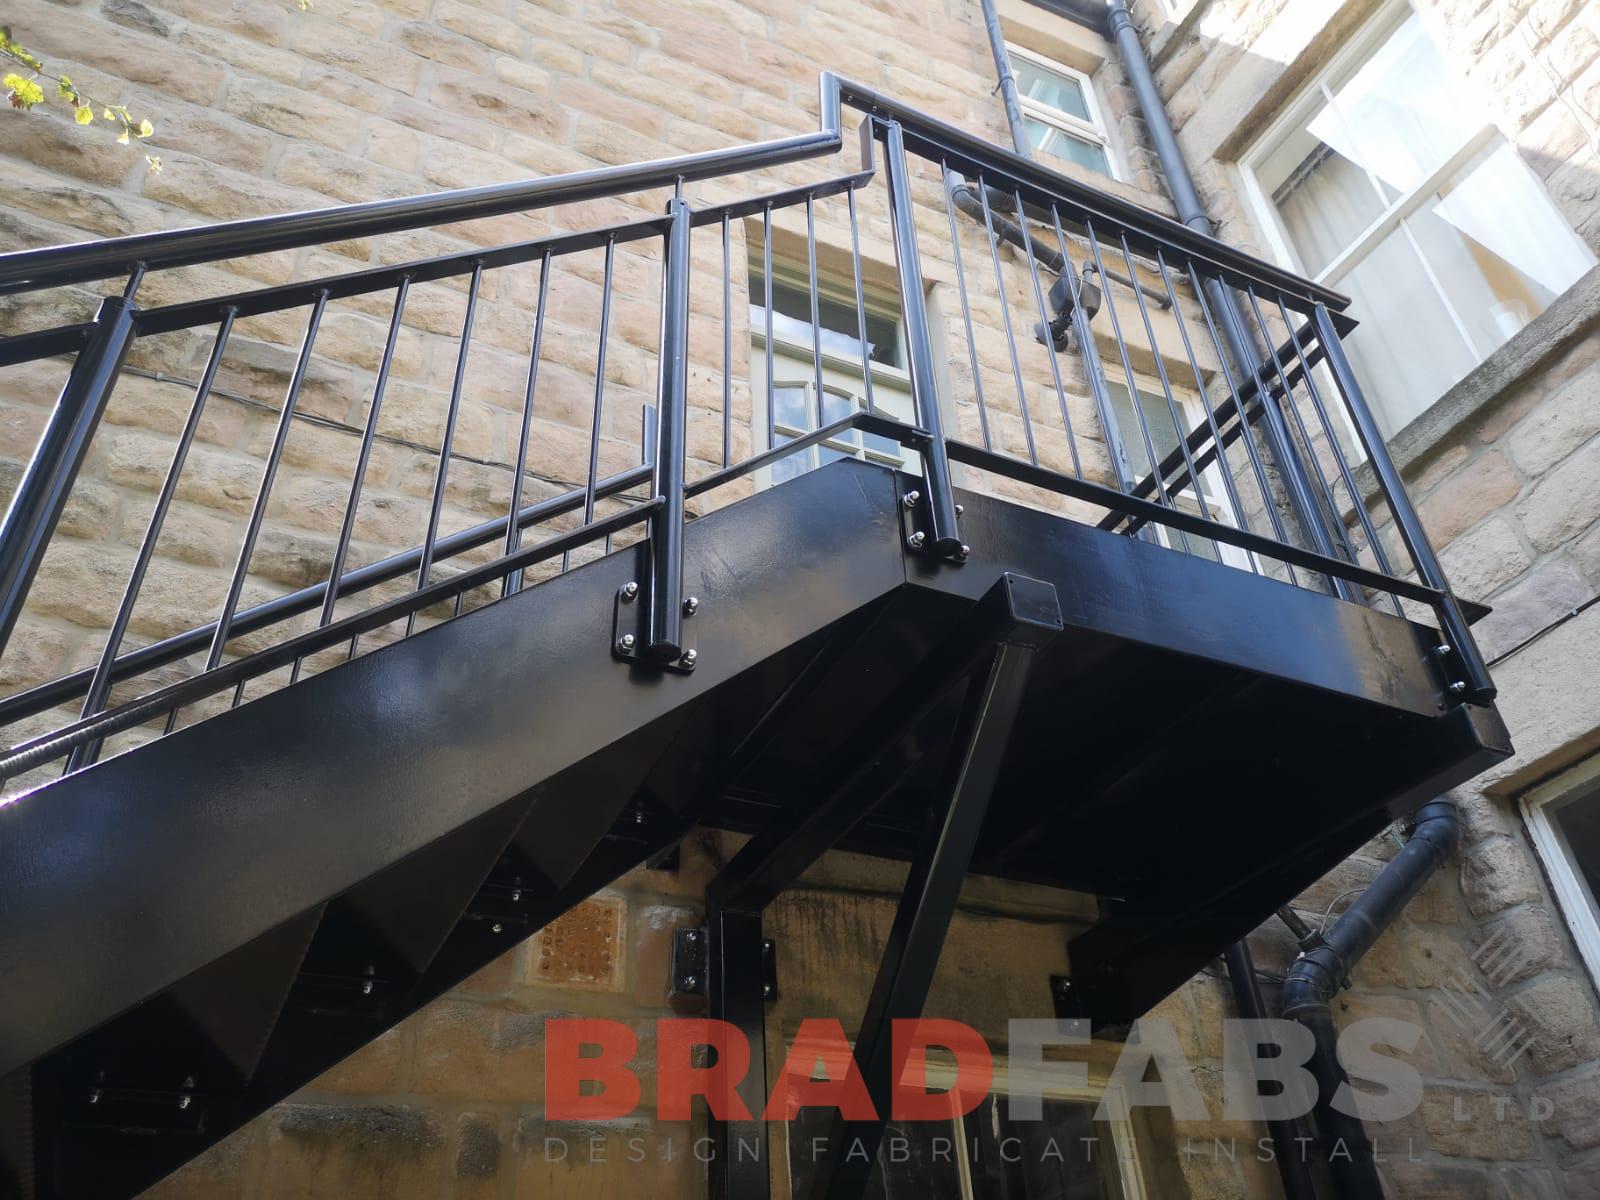 Small landing at the top of external straight staircase in mild steel, galvanised and powder coated black at customers choice with vertical bar balustrade by Bradfabs 